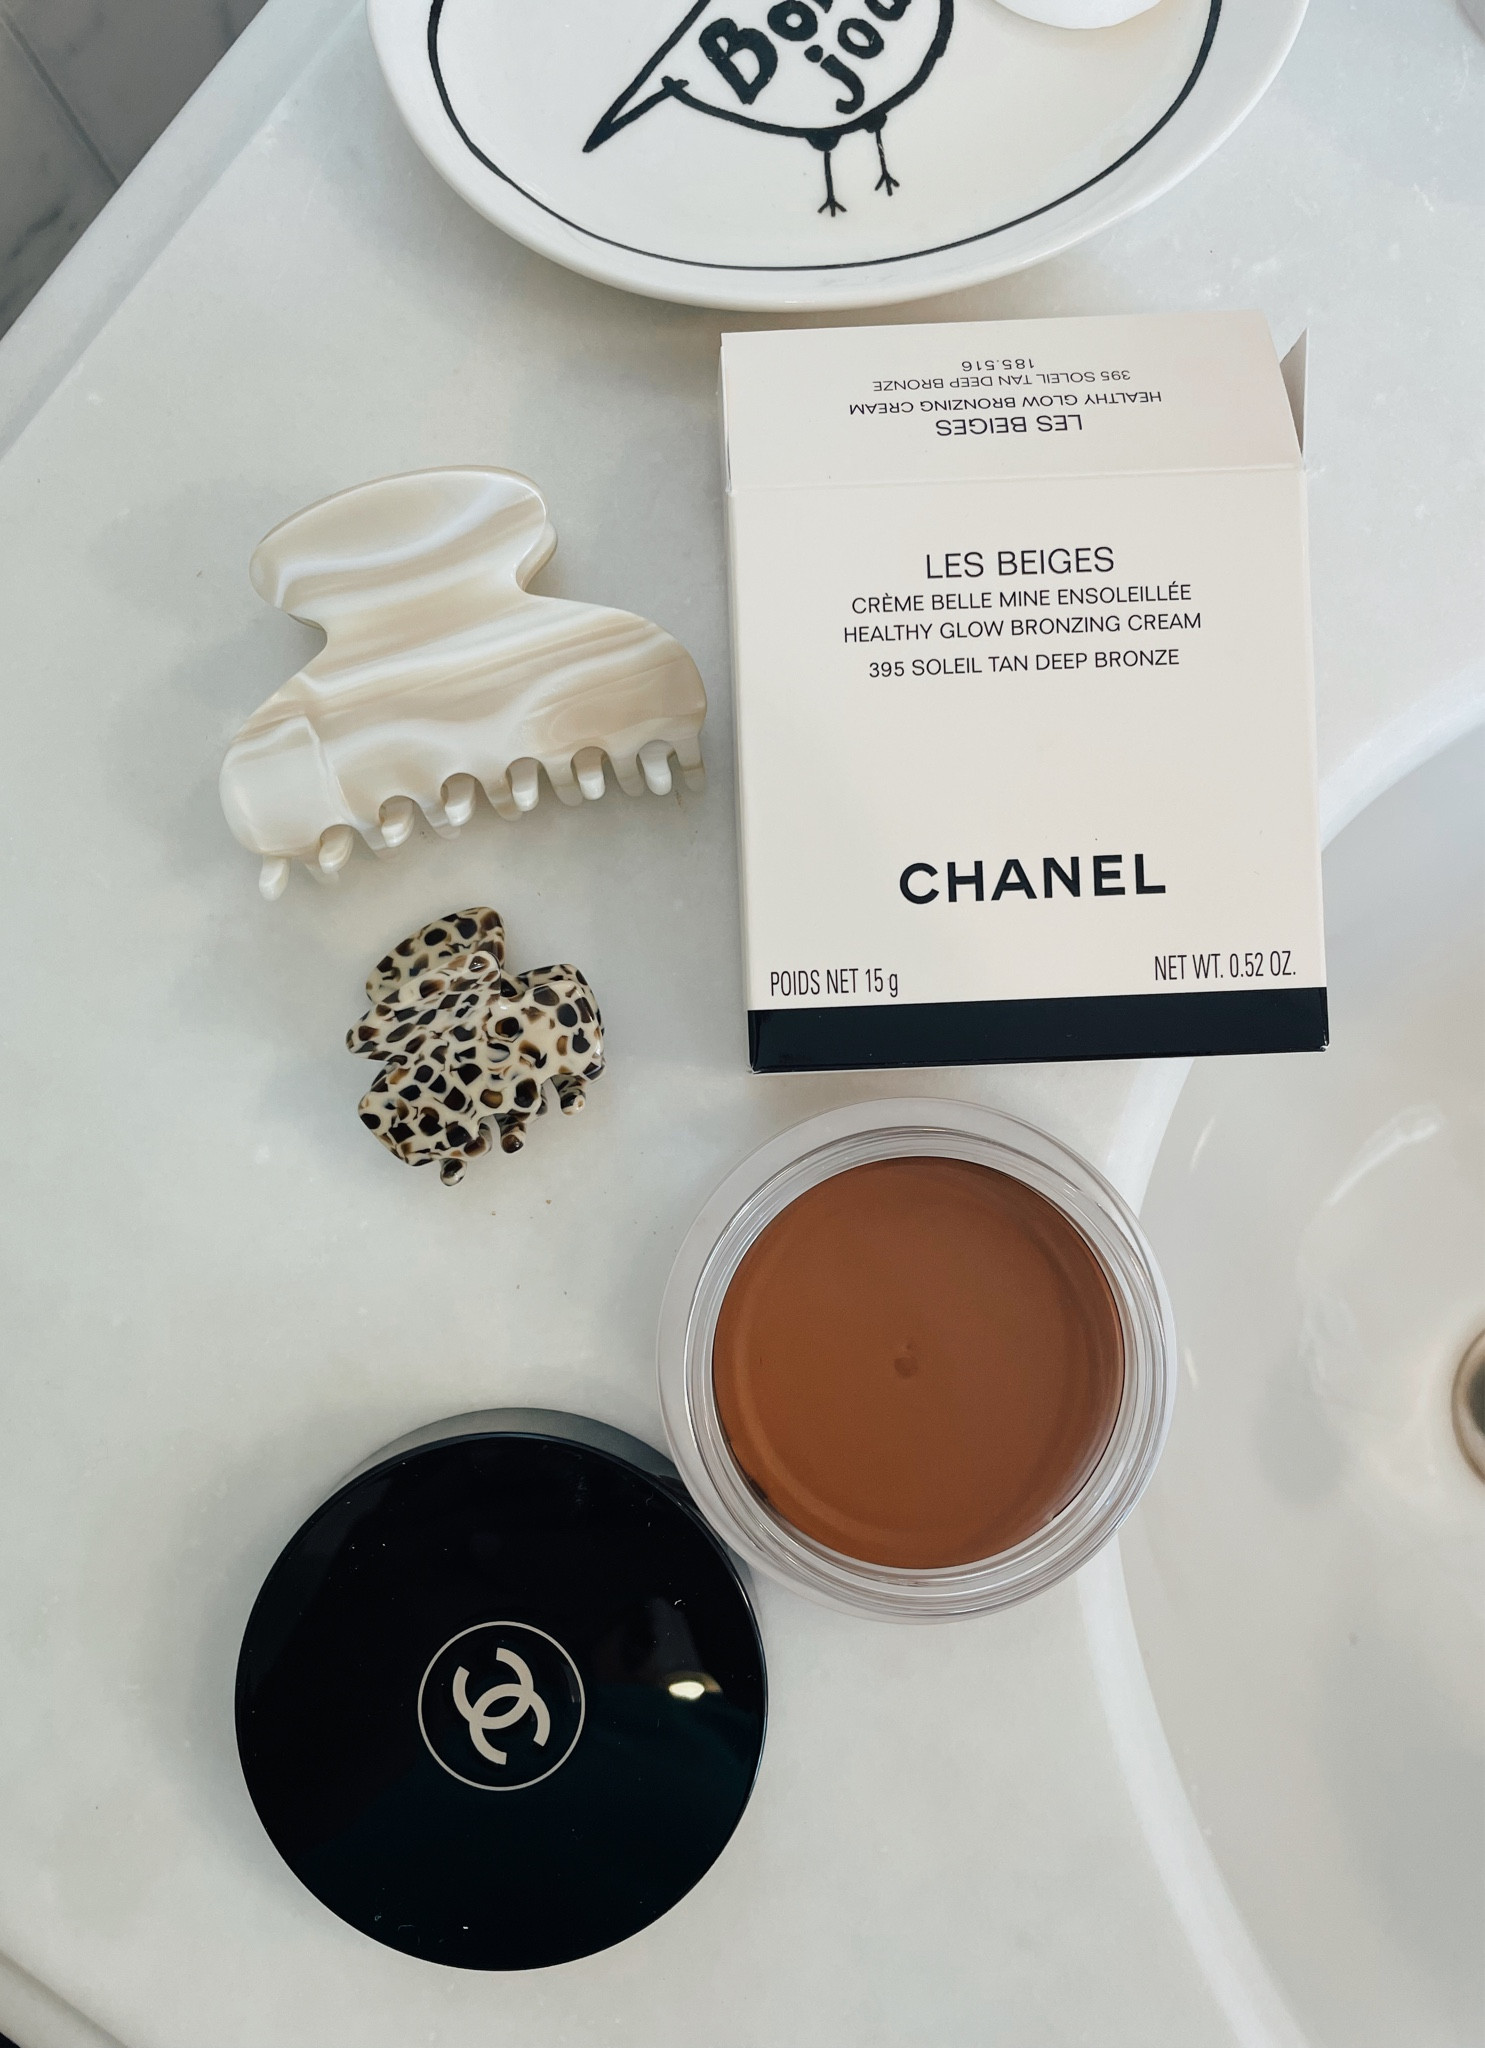 CHANEL Travel-Size Water-Fresh Tint curated on LTK